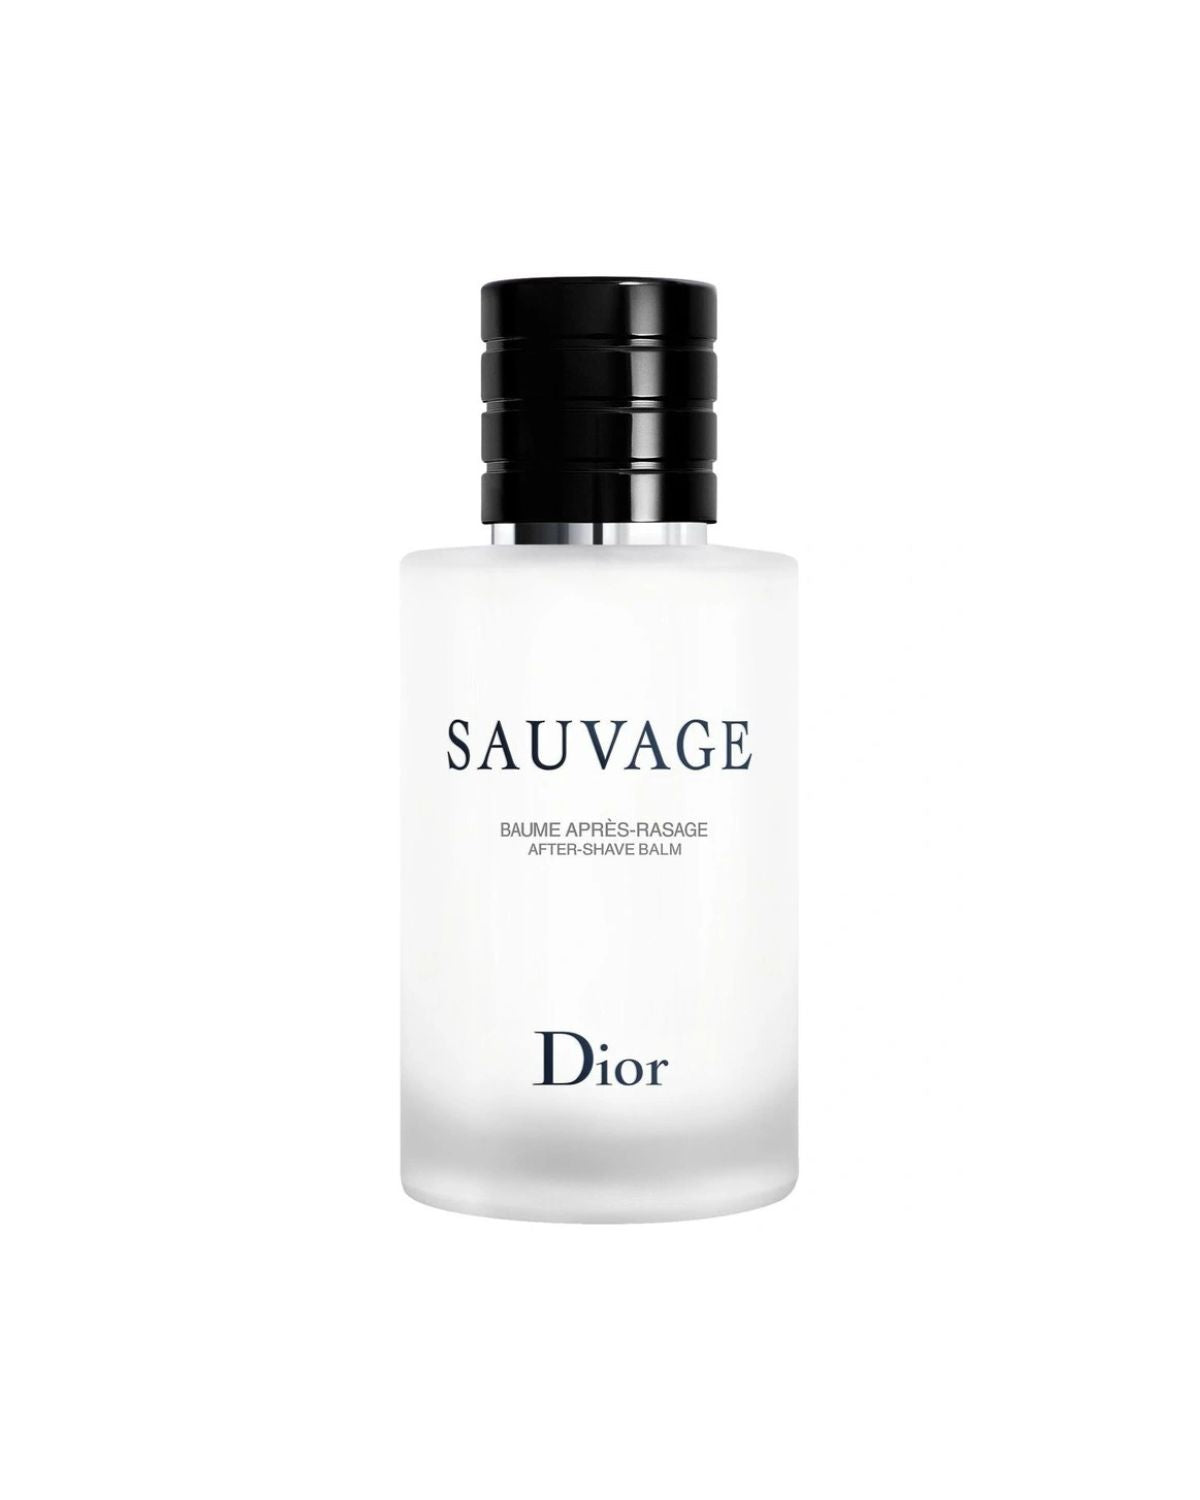 Sauvage After- shave Balm